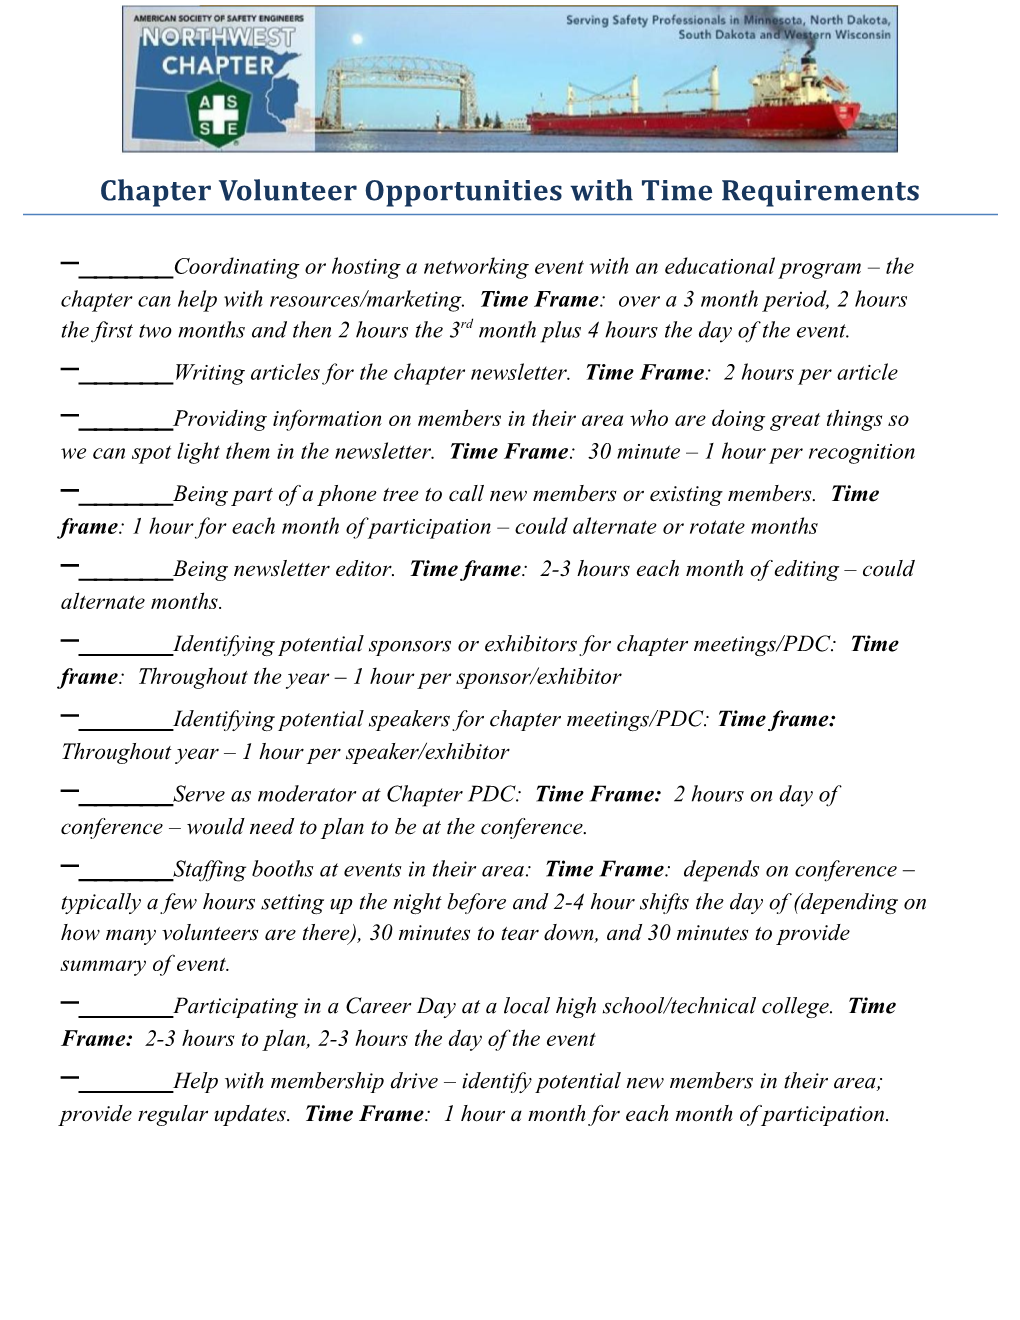 Chapter Volunteer Opportunities with Time Requirements